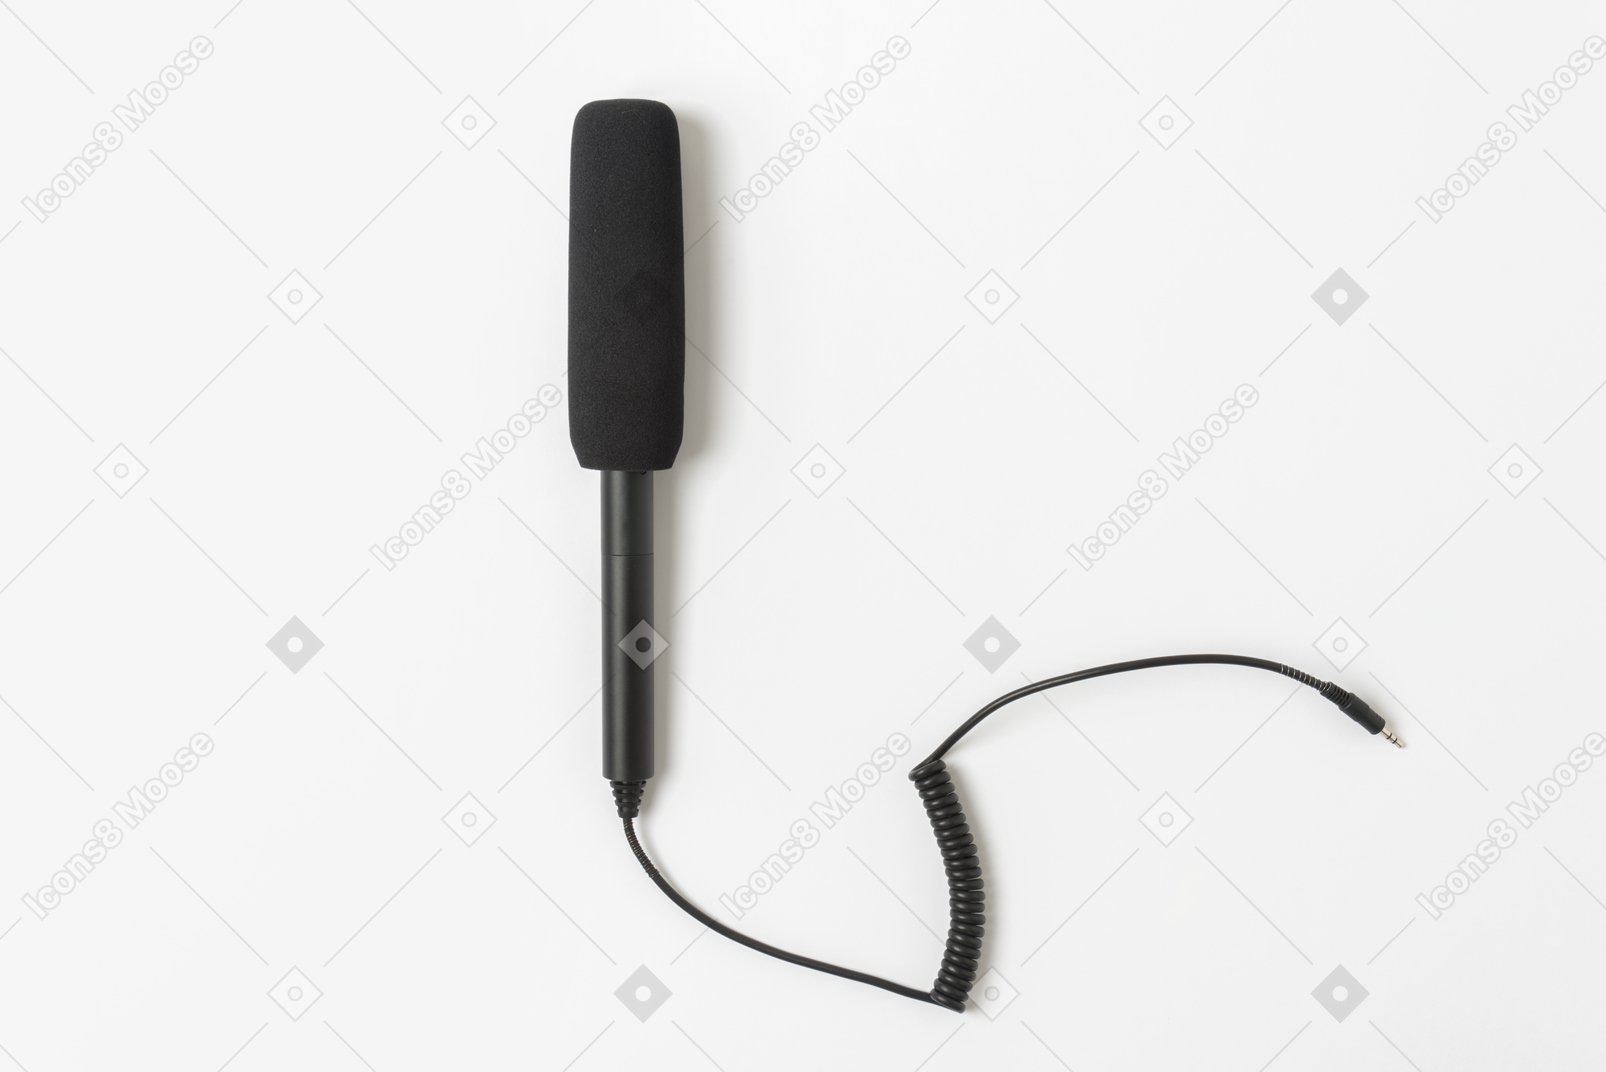 Microphone with wire on white background